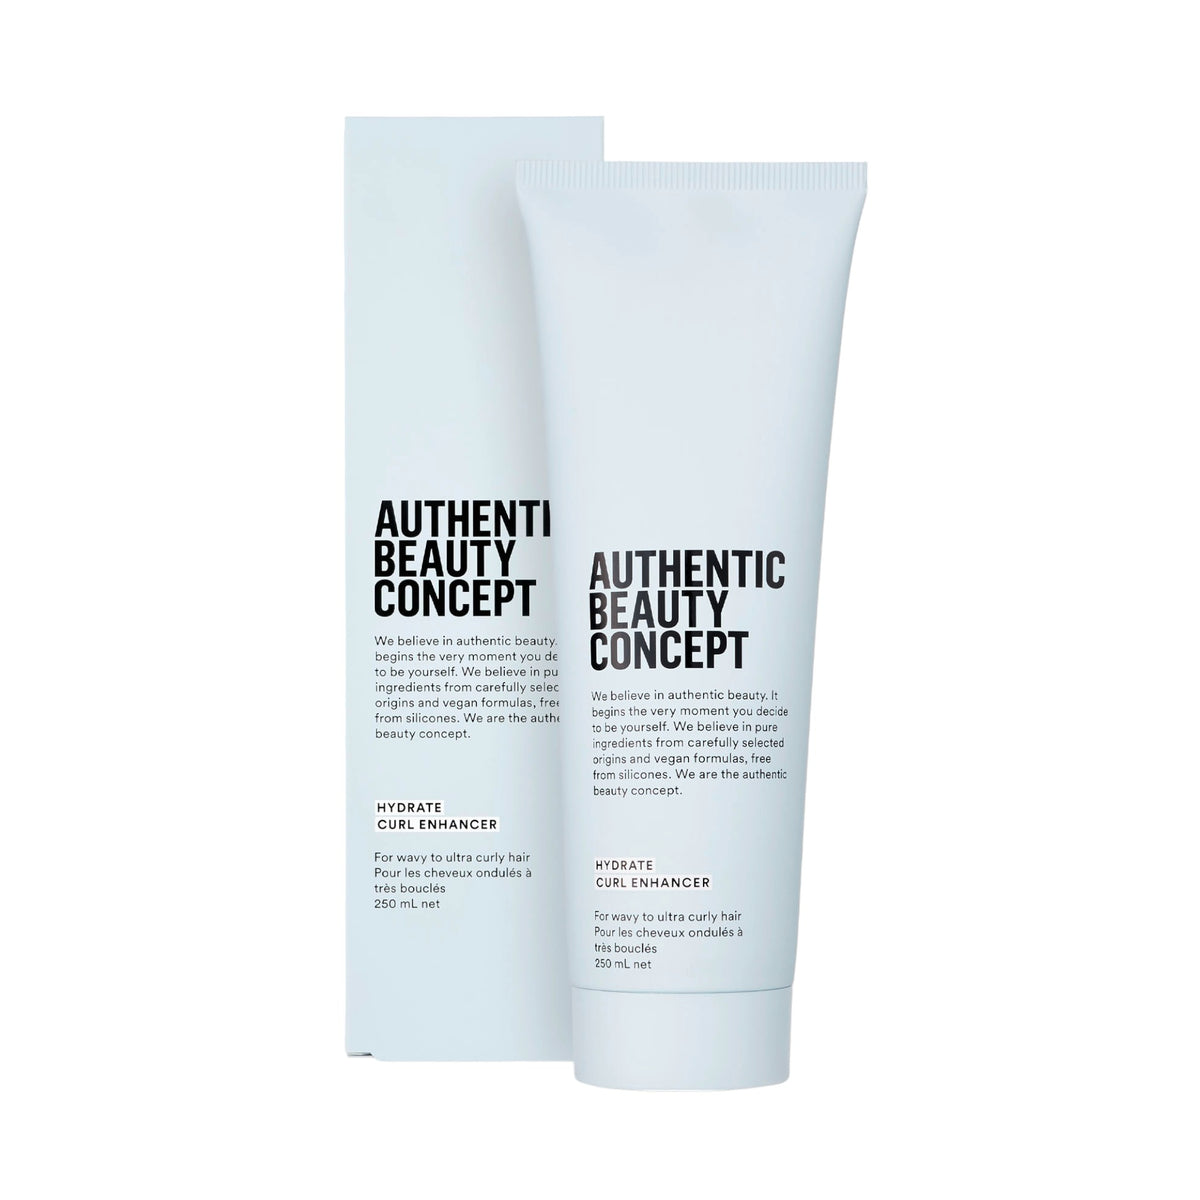 Authentic Beauty Concept Hydrate Curl Enhancer 250ml